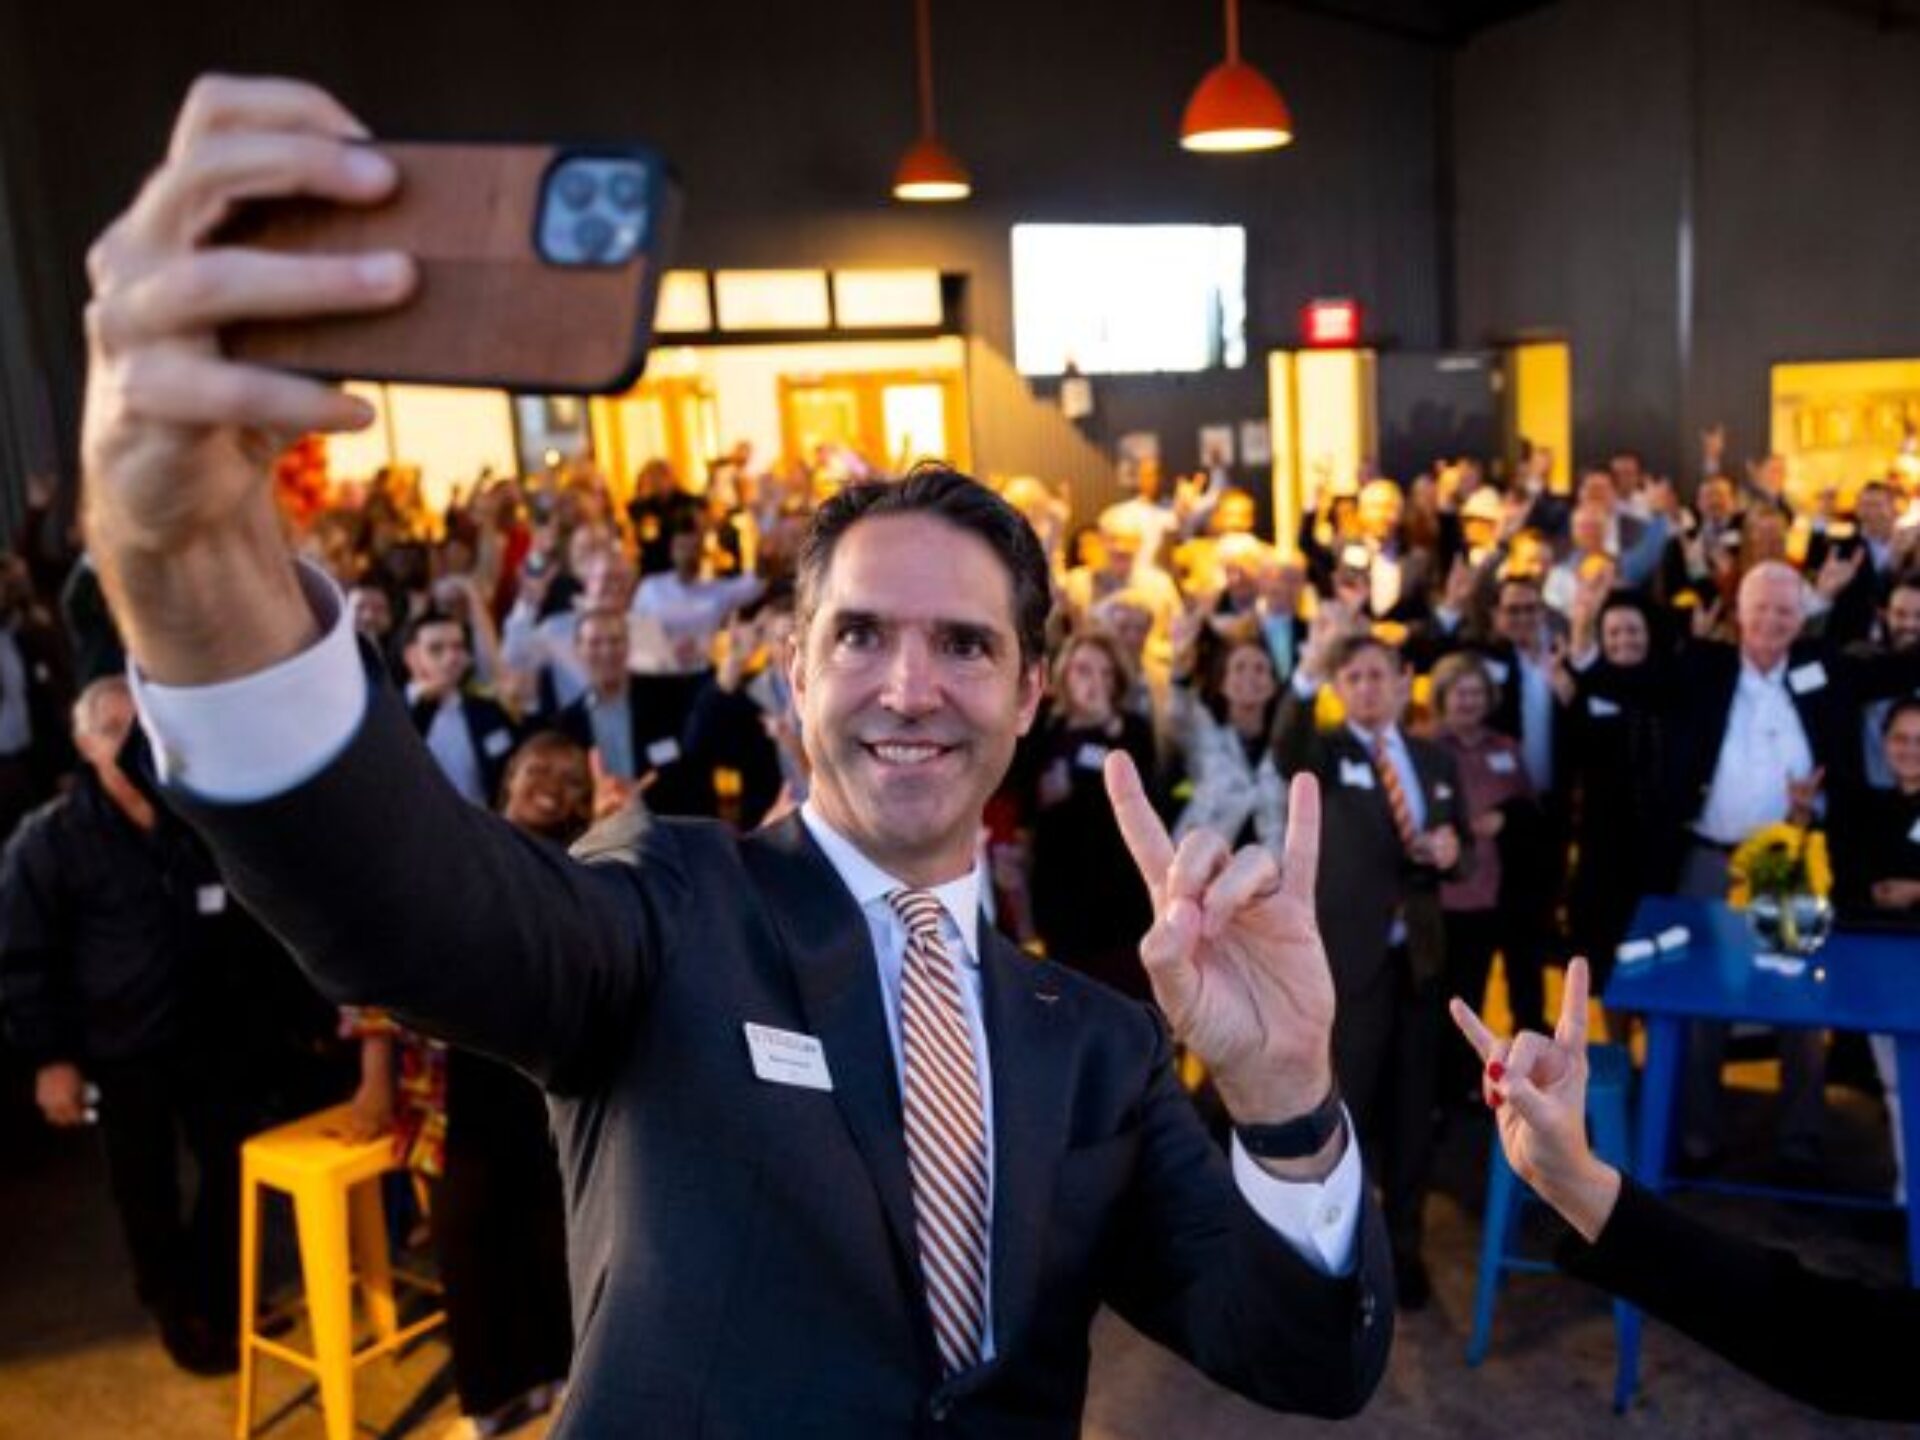 Dean Chesney holding a cell phone to take a selfie with alumni at event